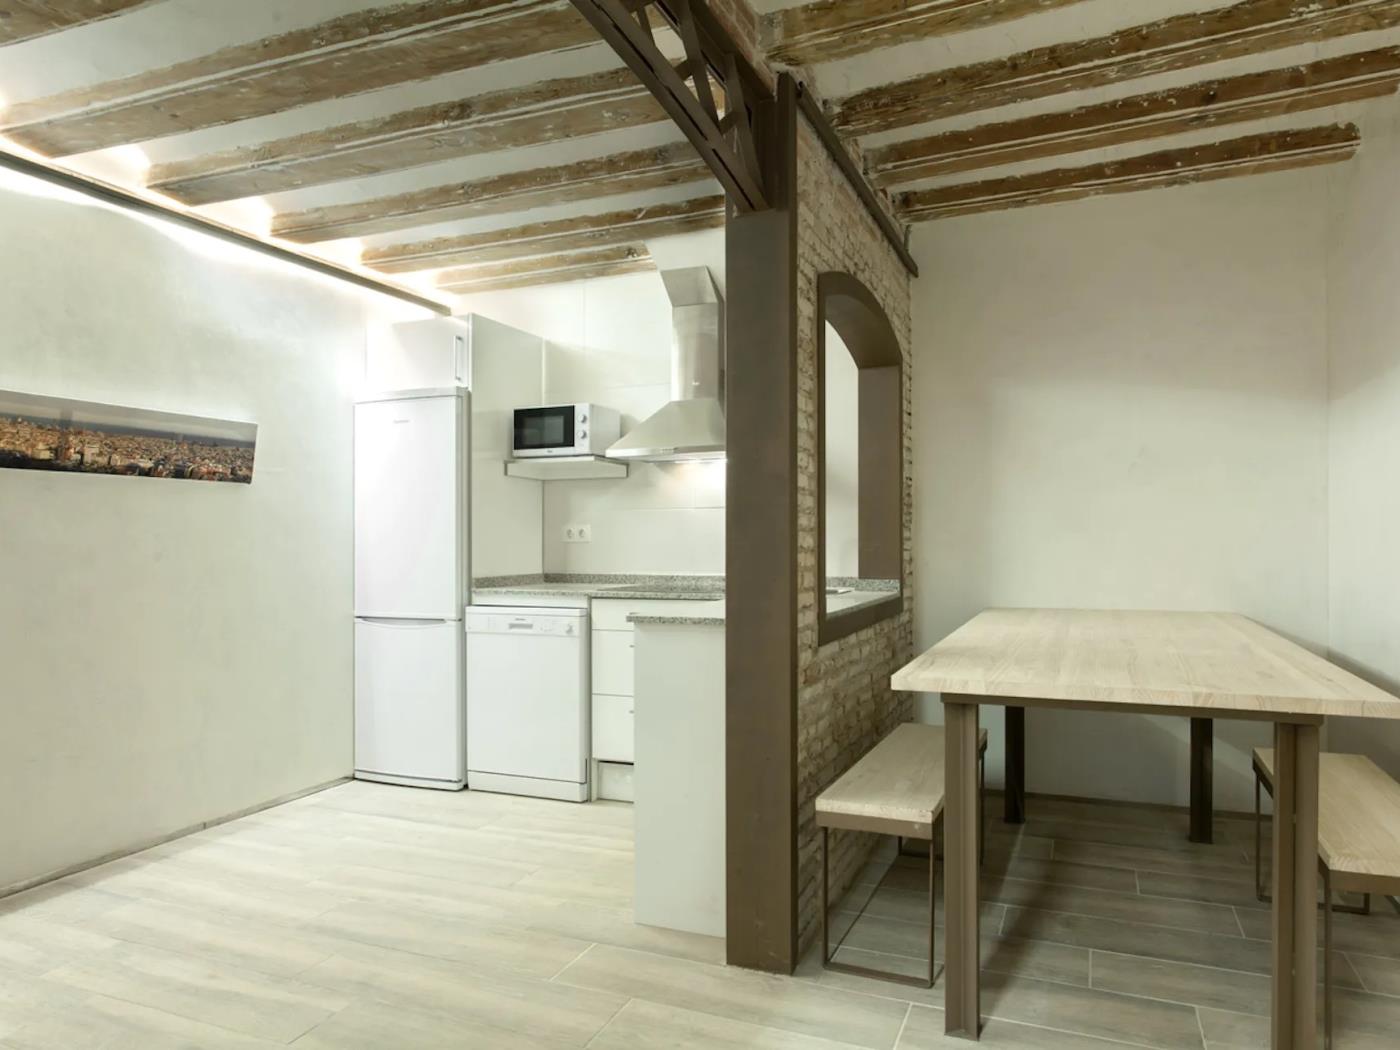 Spacious and bright room with with private bathroom - My Space Barcelona Apartments